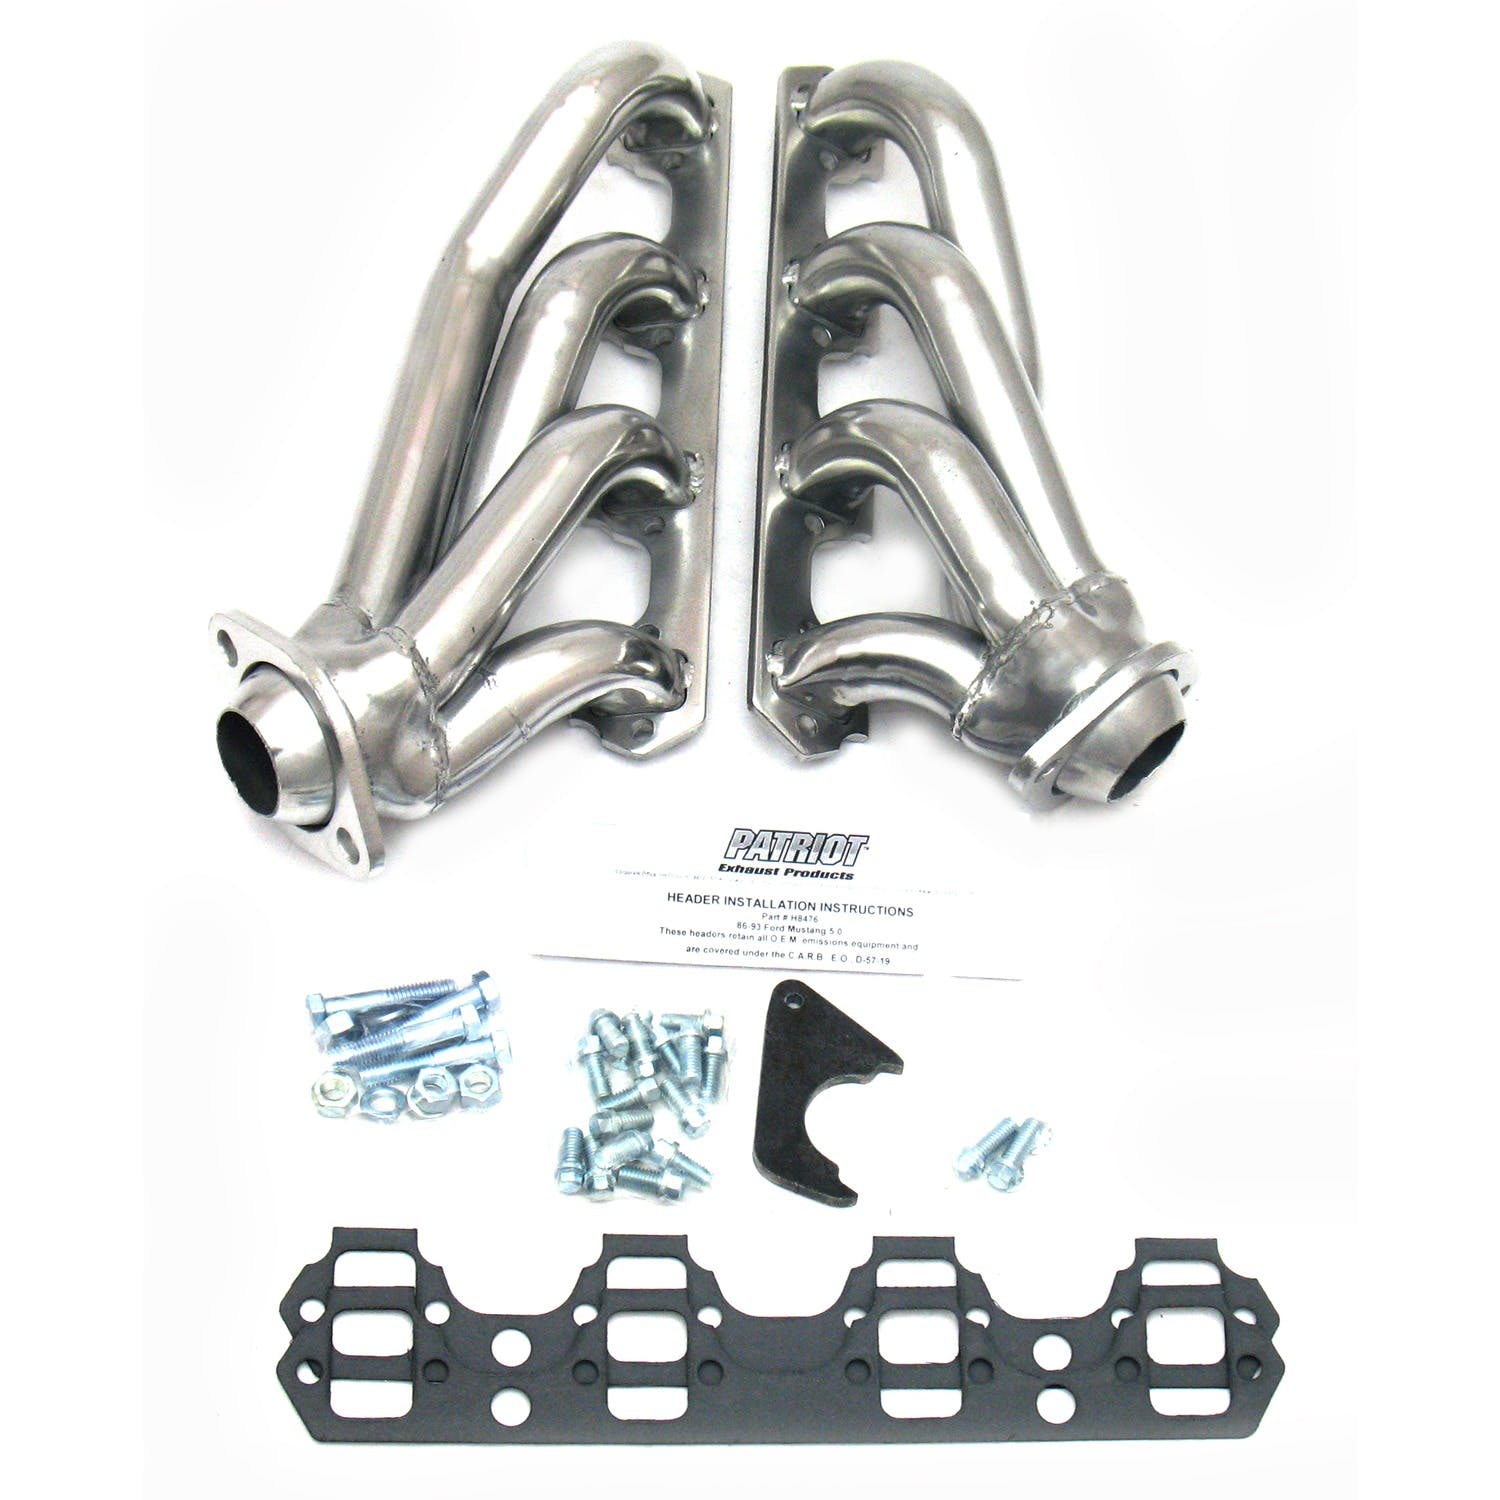 Patriot Exhaust H8476-1 86-93 Mustang 5.0 Emission Legal Silver